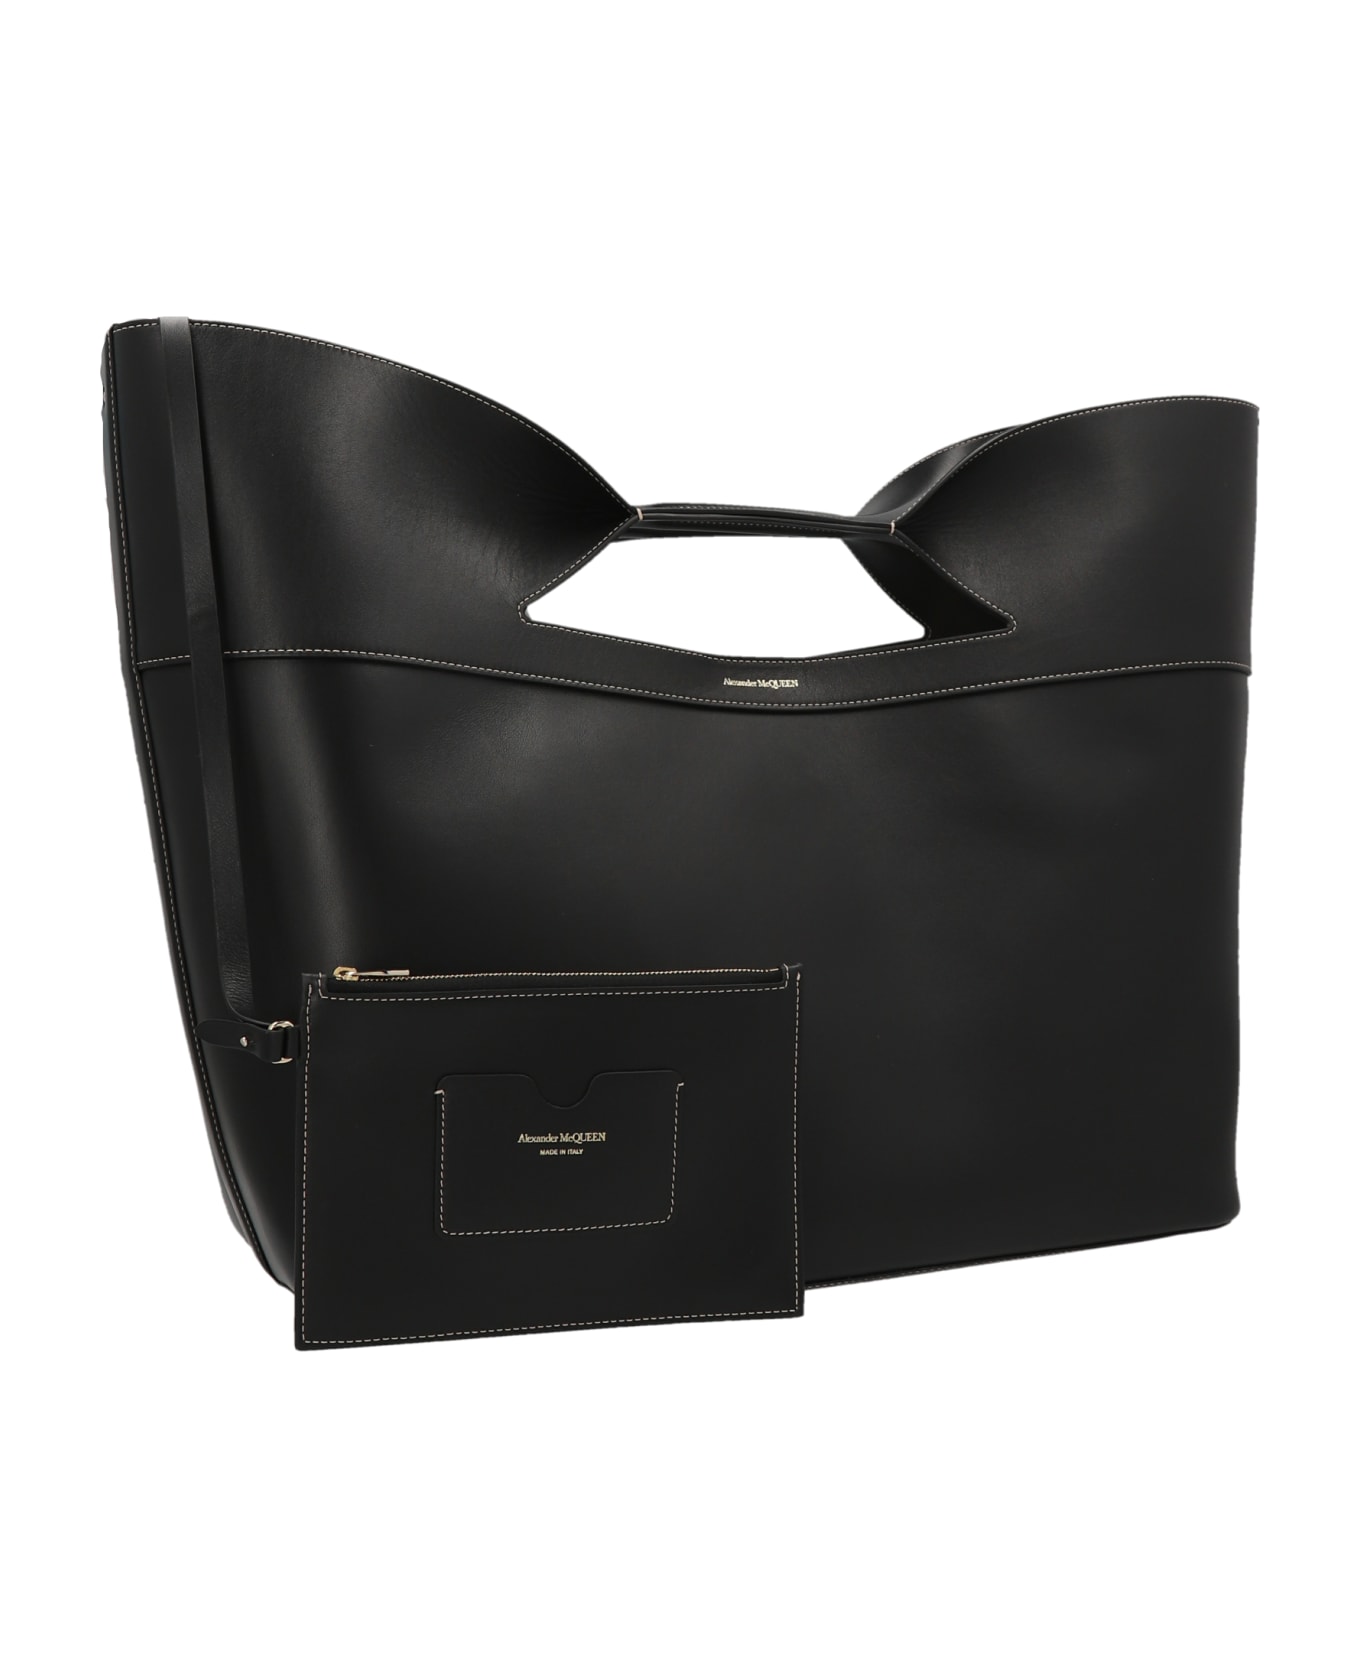 Alexander McQueen The Bow Leather Bag - Black トートバッグ